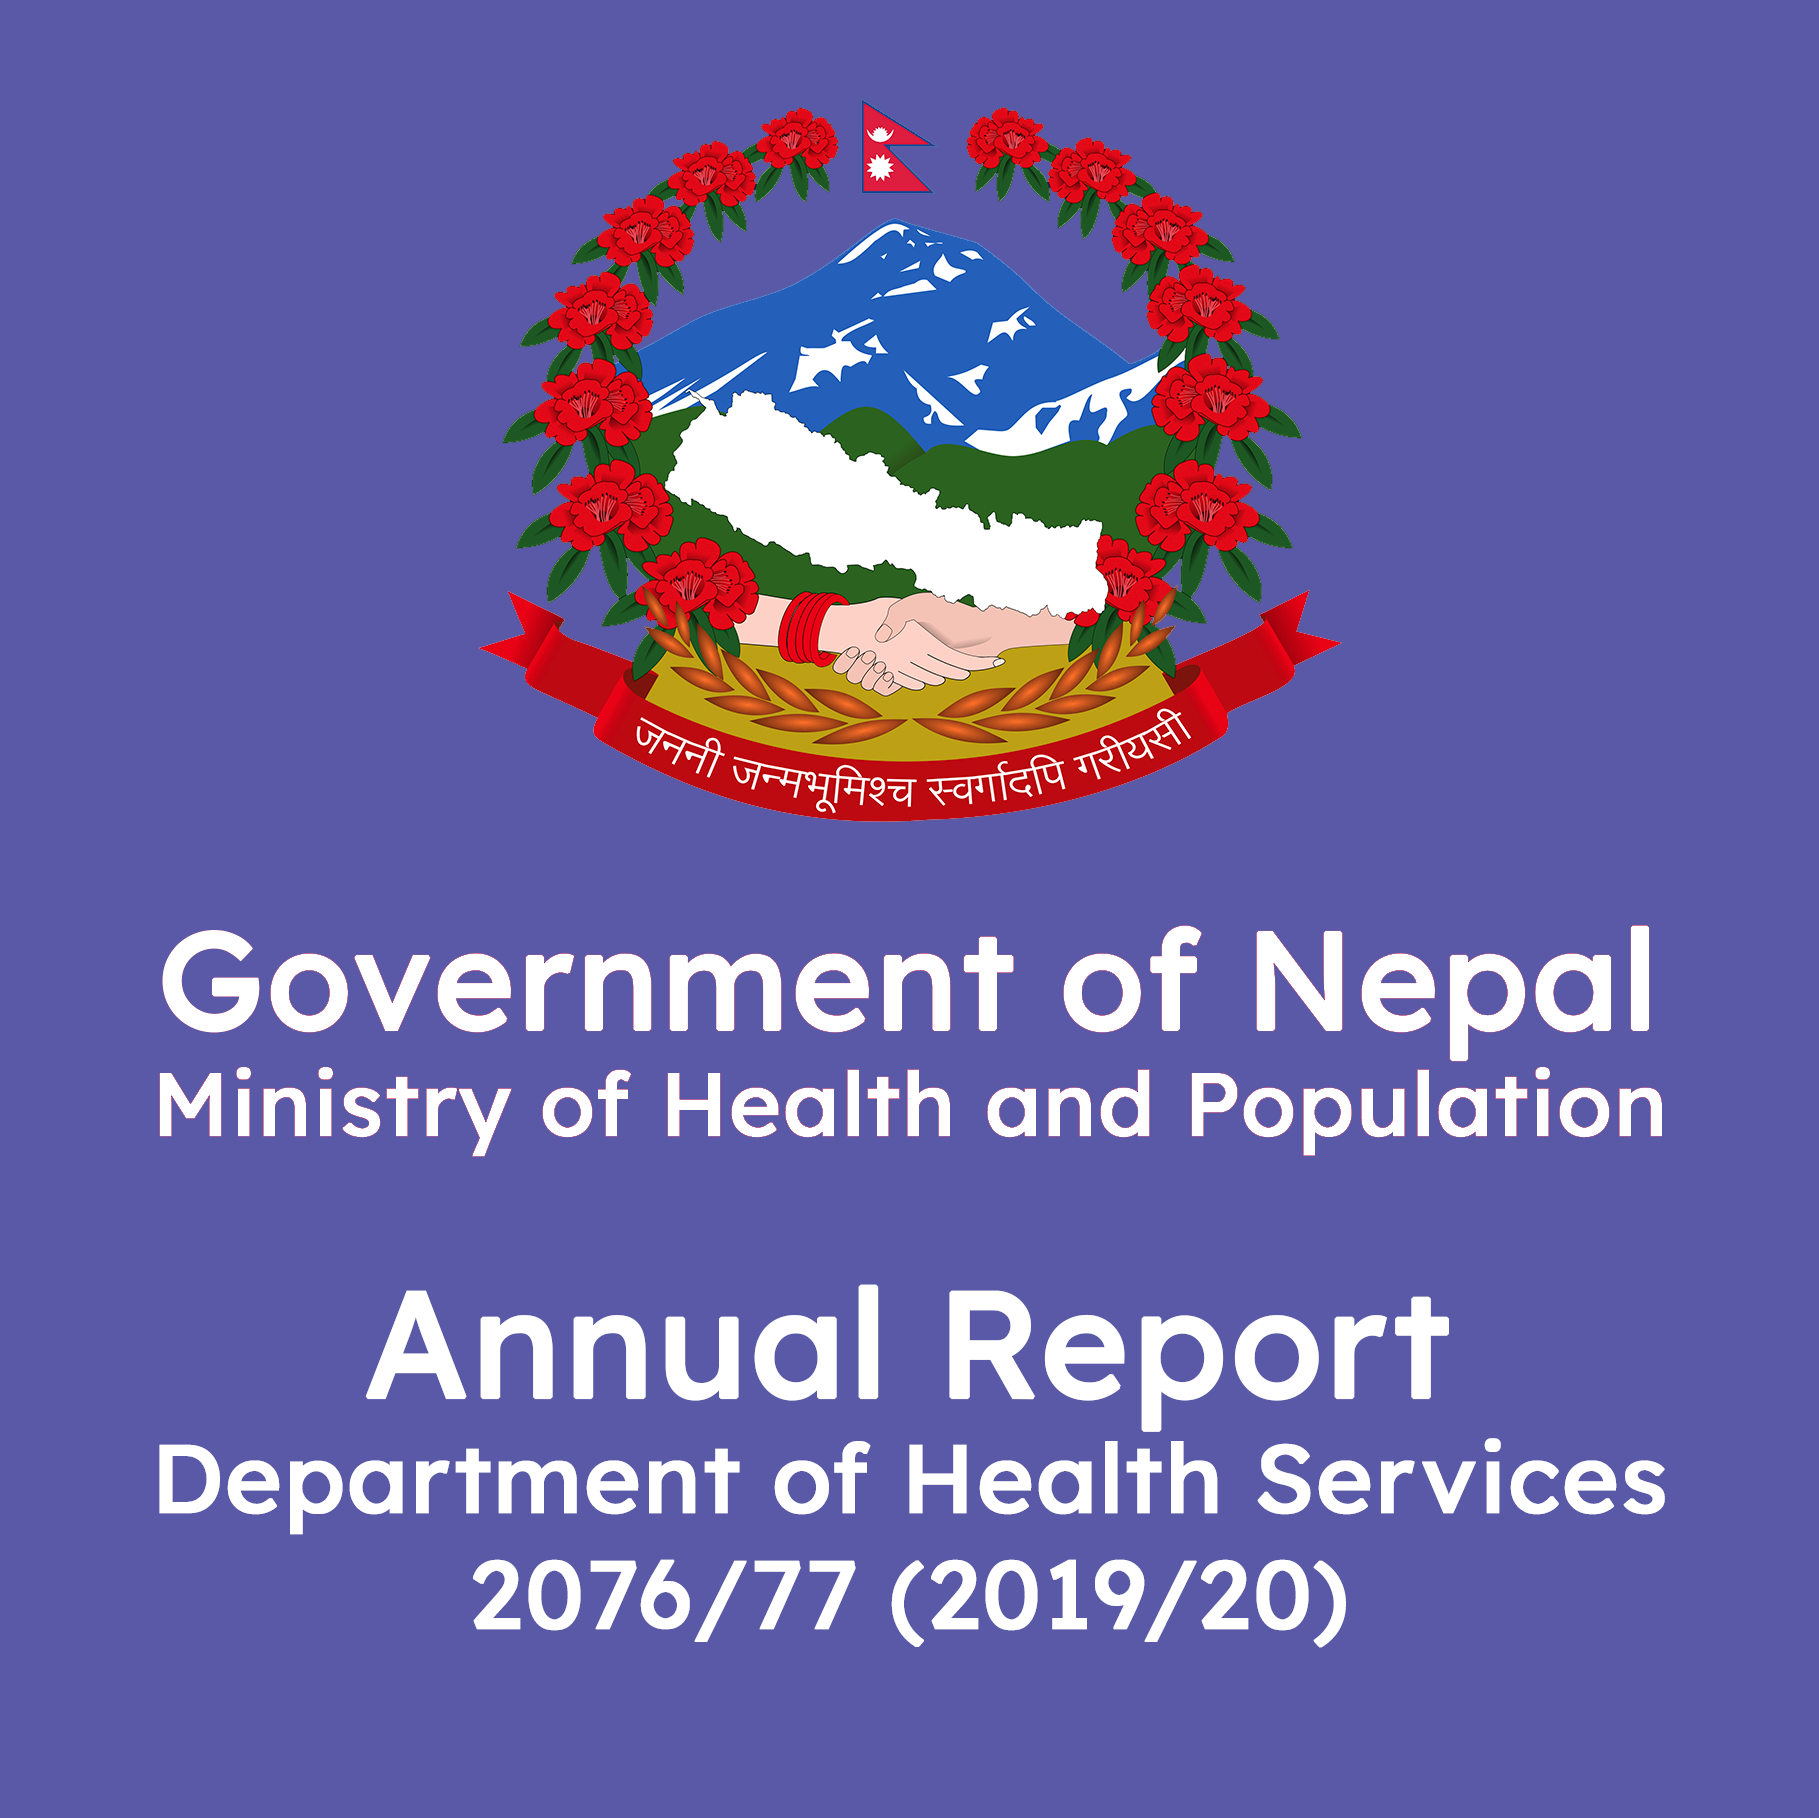 DoHS Annual Report – Department of Health Services 2019/20